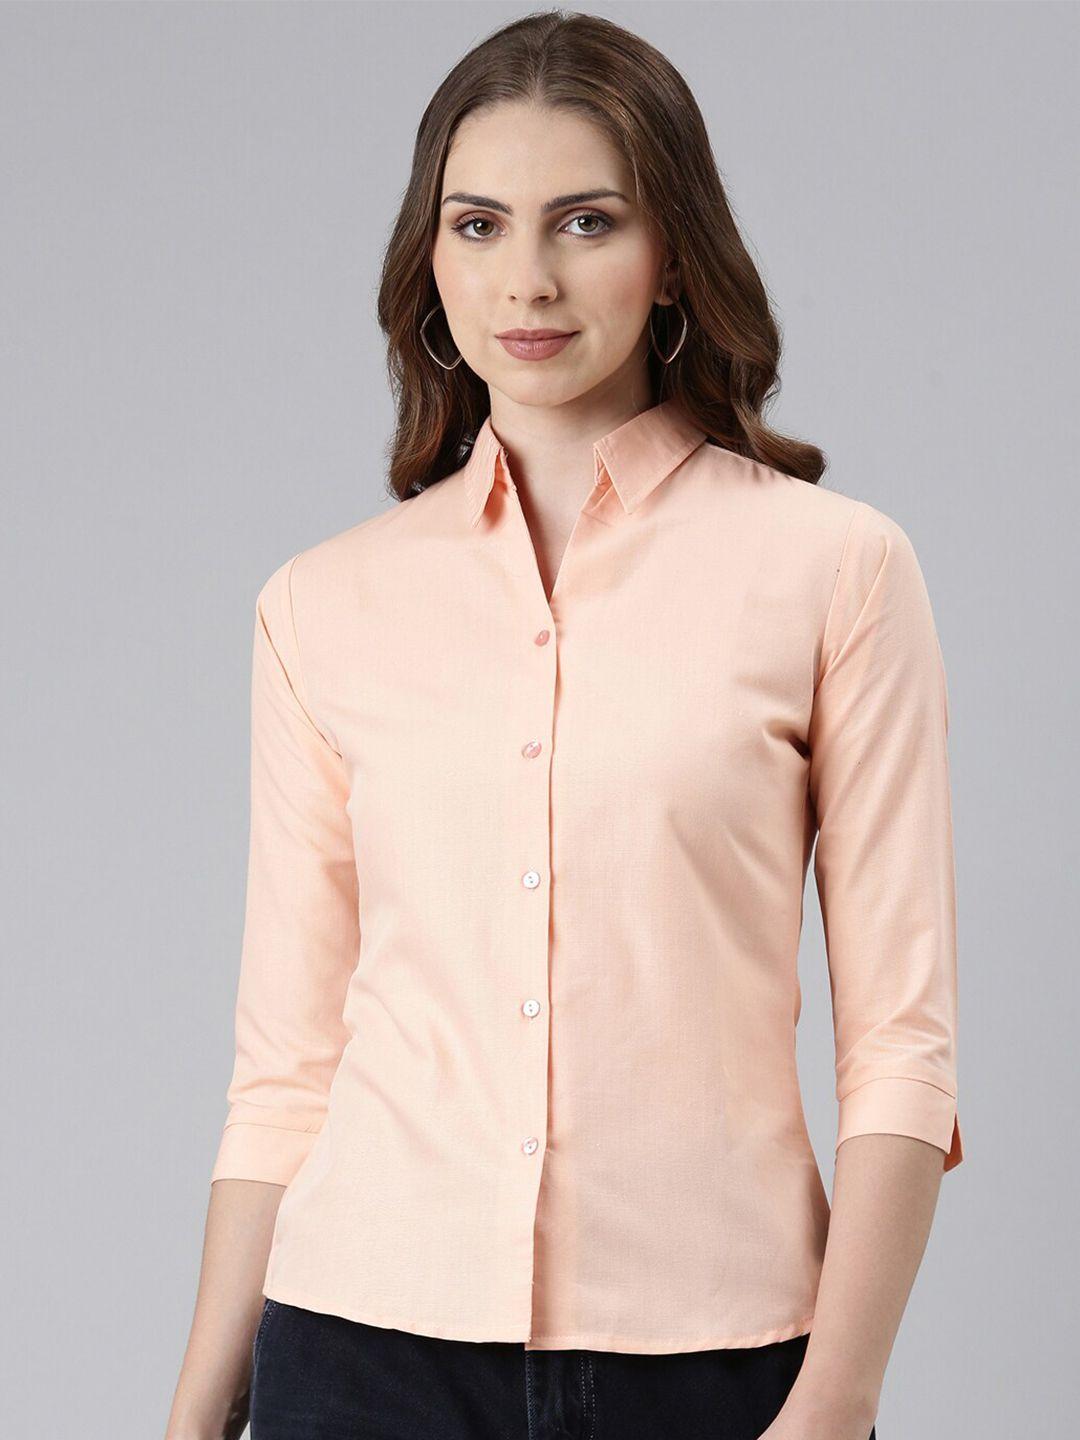 showoff-classic-spread-collar-cotton-slim-fit-casual-shirt